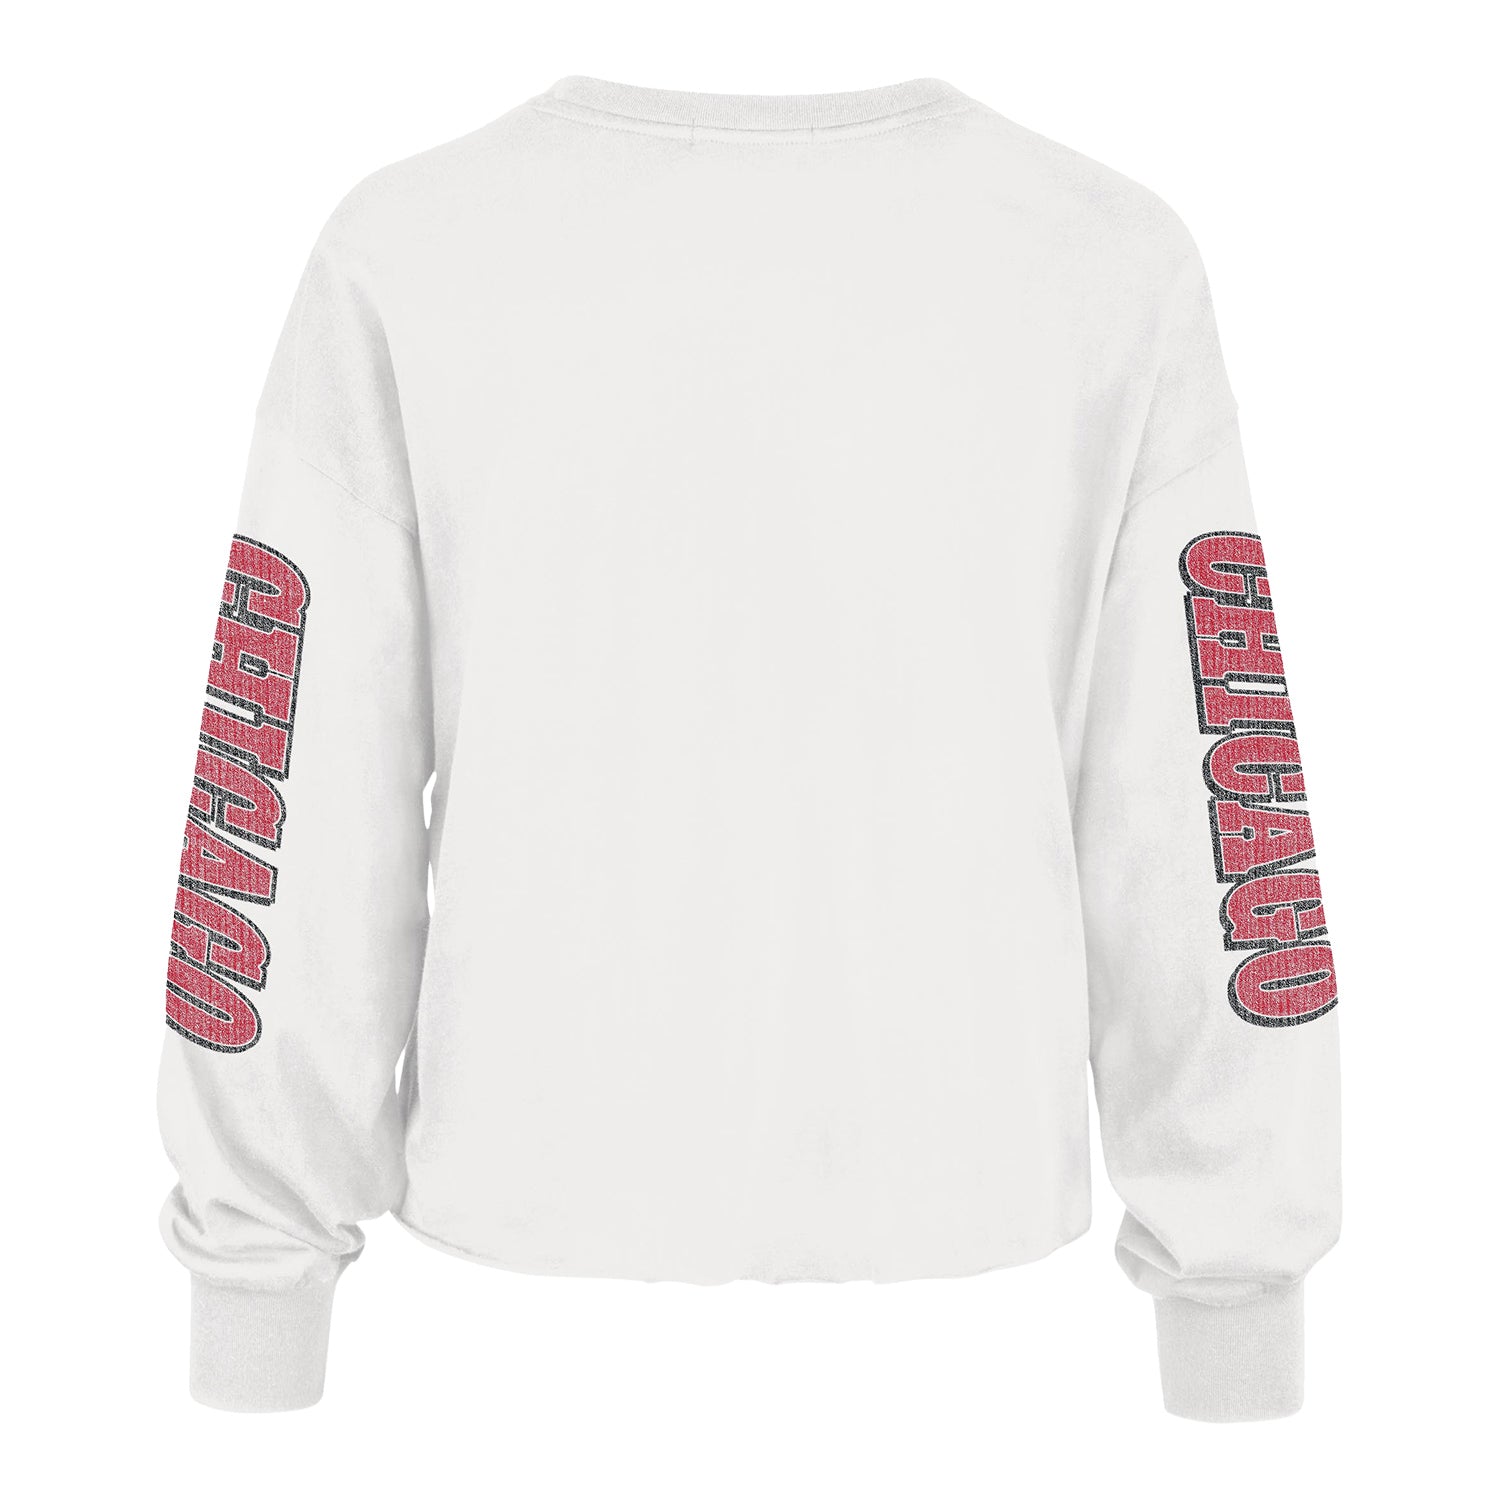 Official Chicago Bulls Ladies Long-Sleeved Shirts, Ladies Long Sleeve  T-Shirts